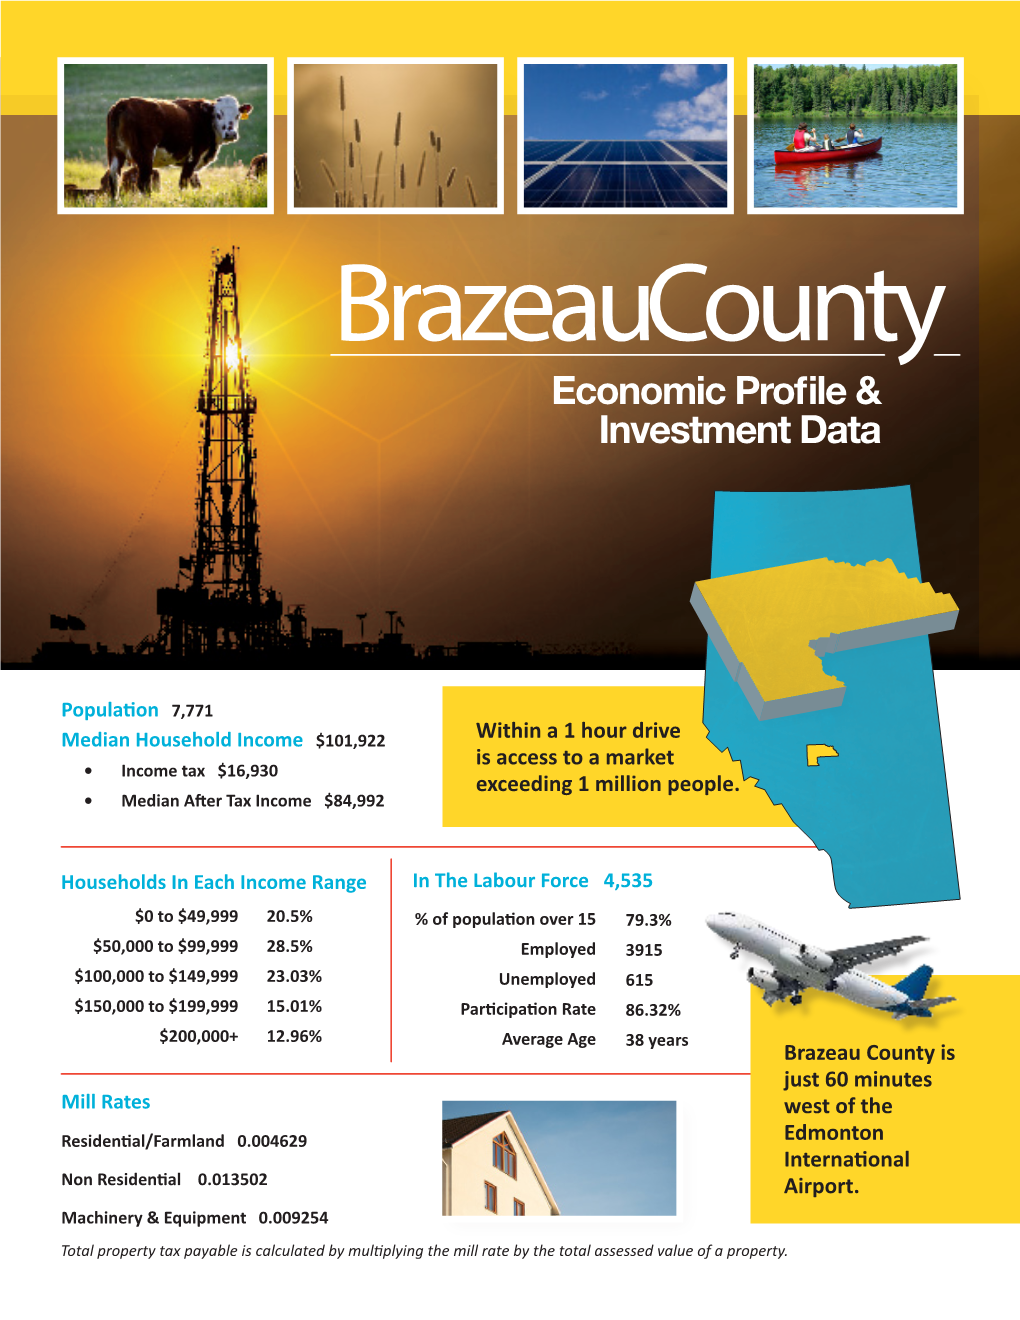 Brazeau County Is Just 60 Minutes Mill Rates West of the Residential/Farmland 0.004629 Edmonton International Non Residential 0.013502 Airport